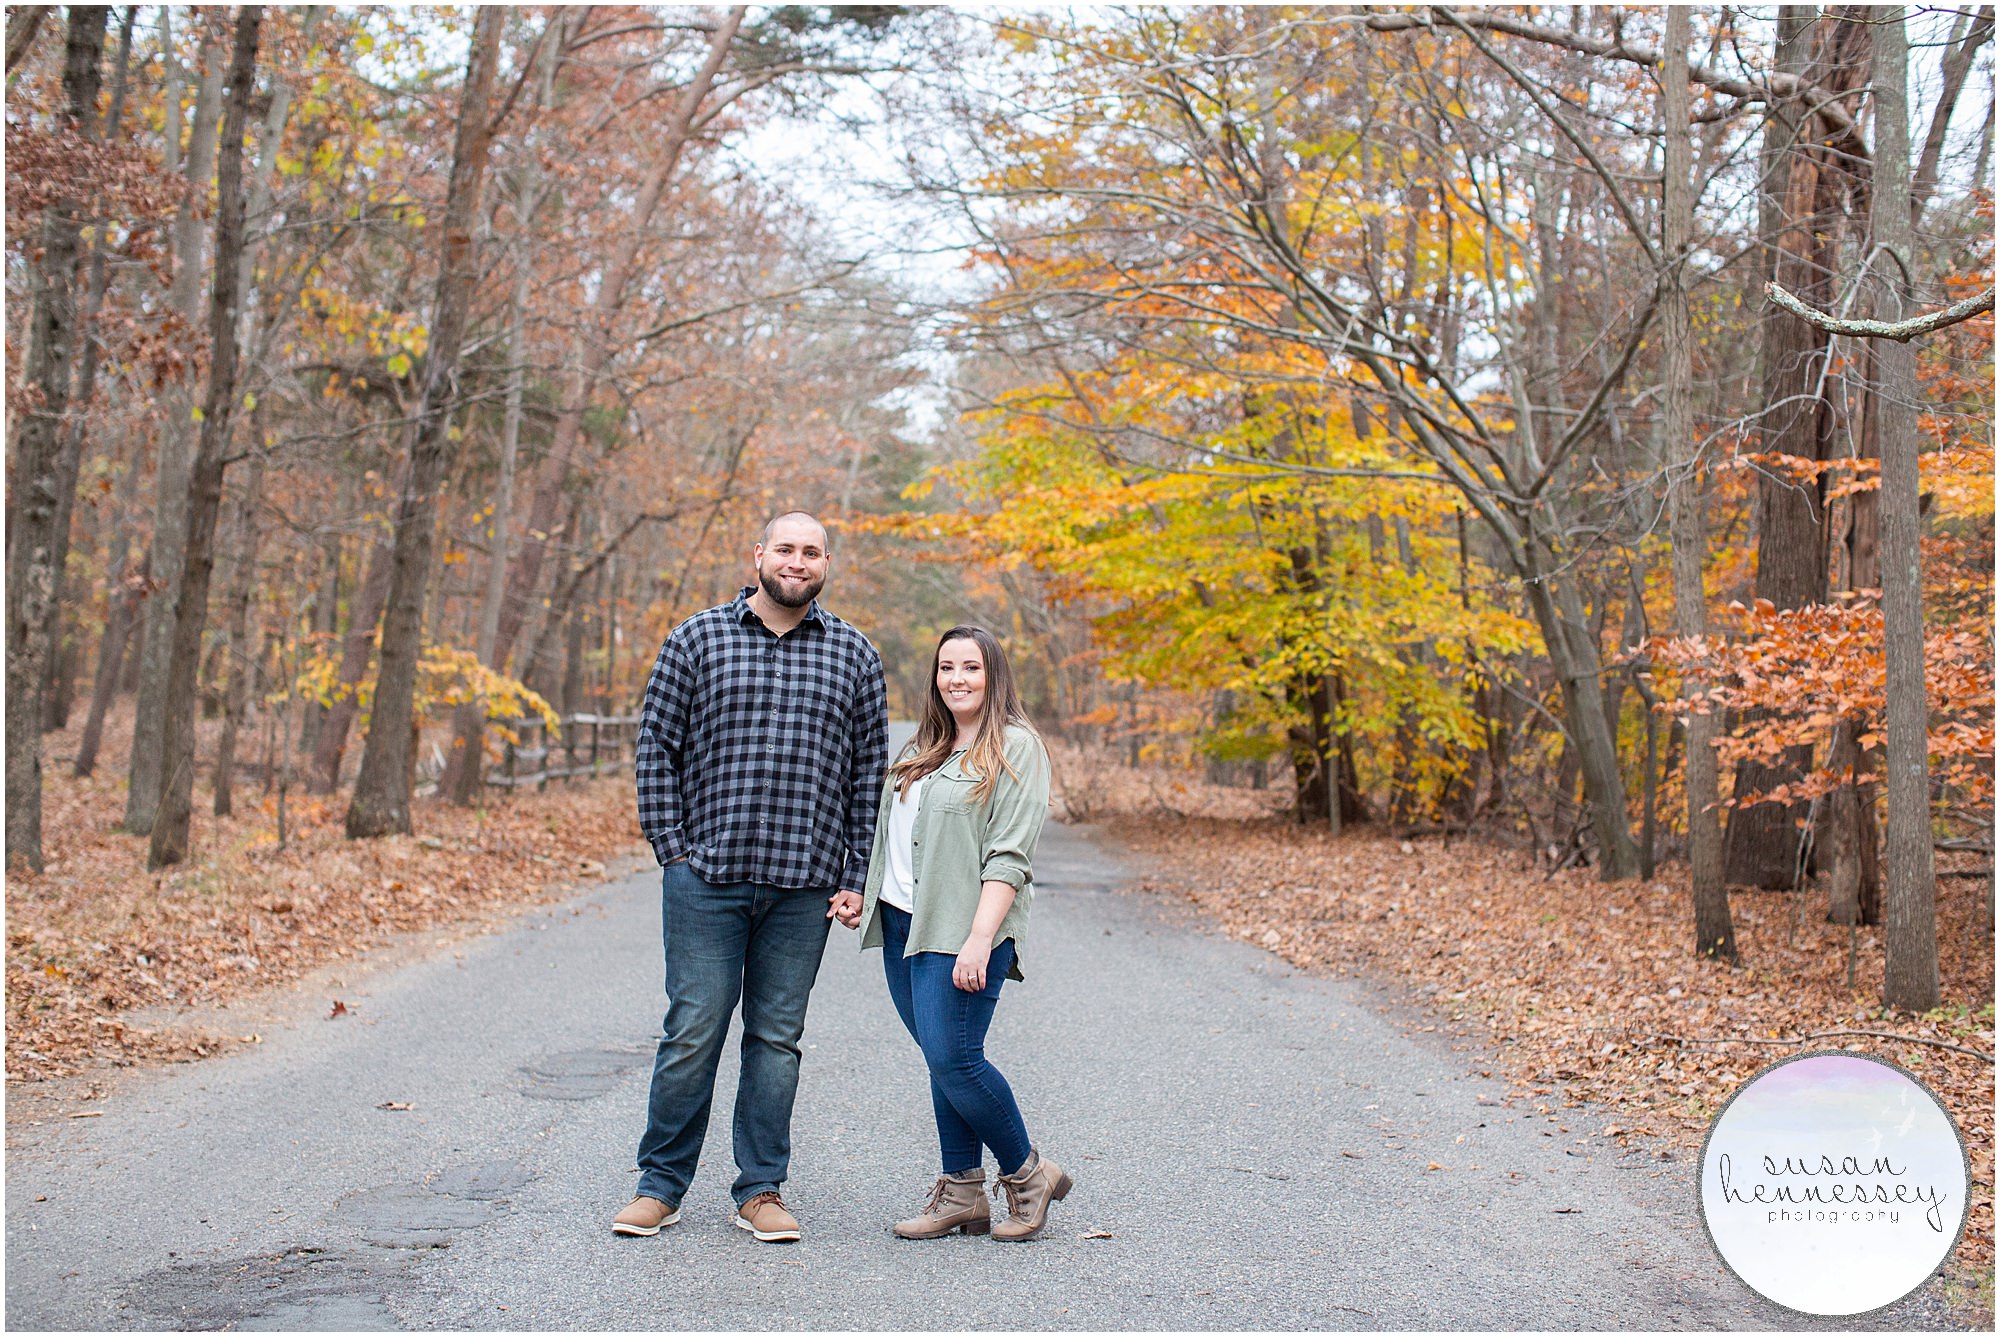 Fall engagement session in Smith's Woods in Eastampton, NJ